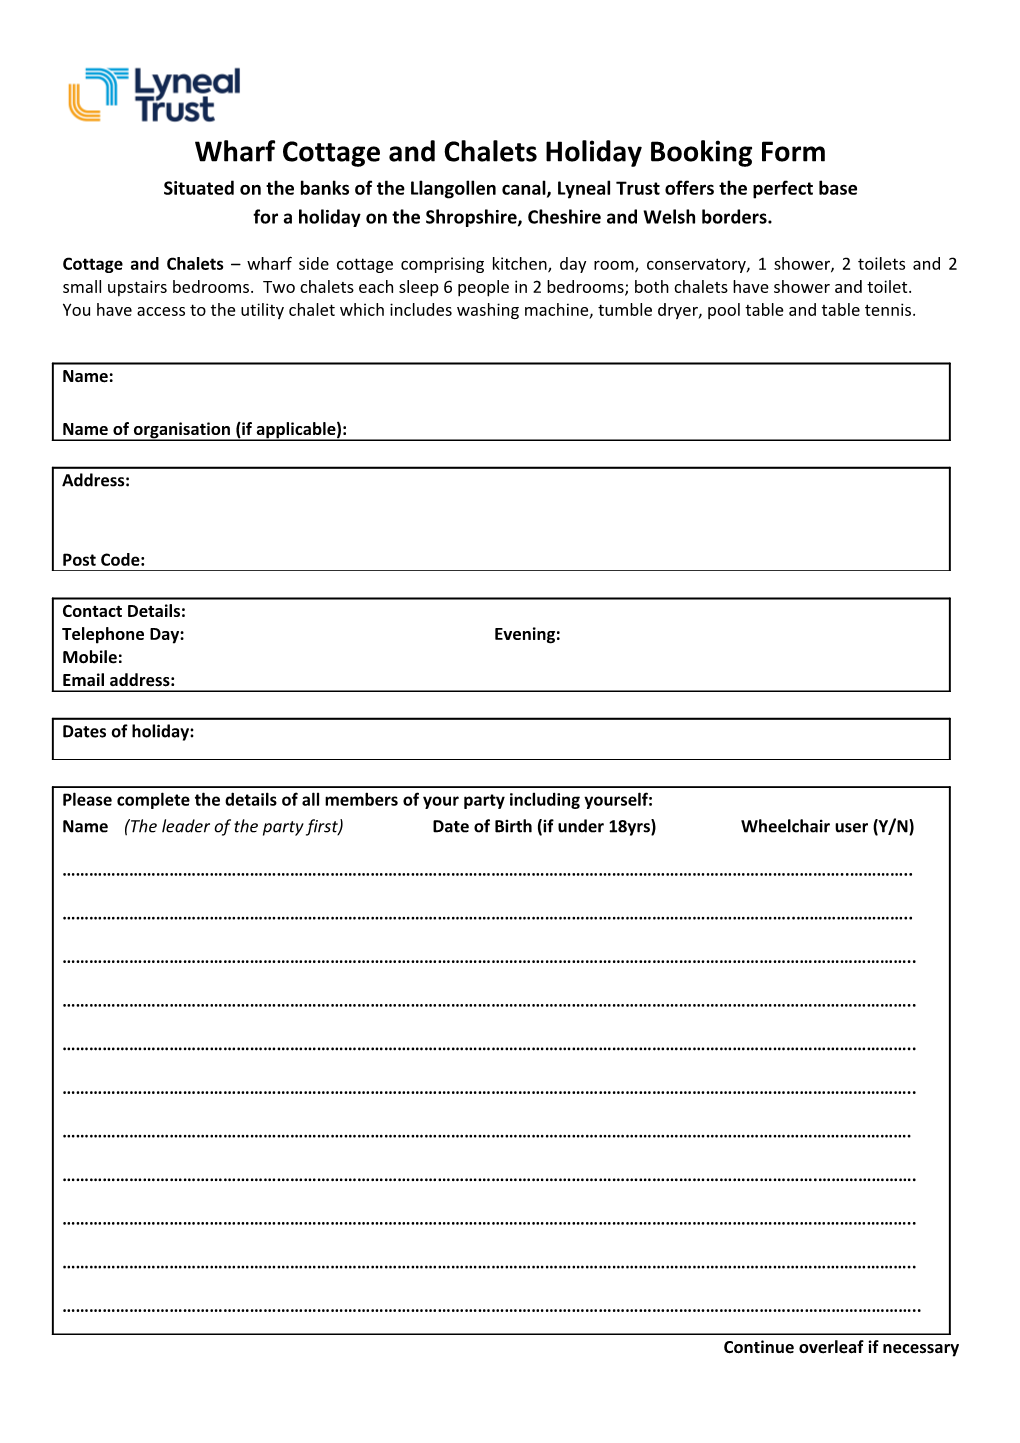 Wharf Cottage and Chalets Holiday Booking Form